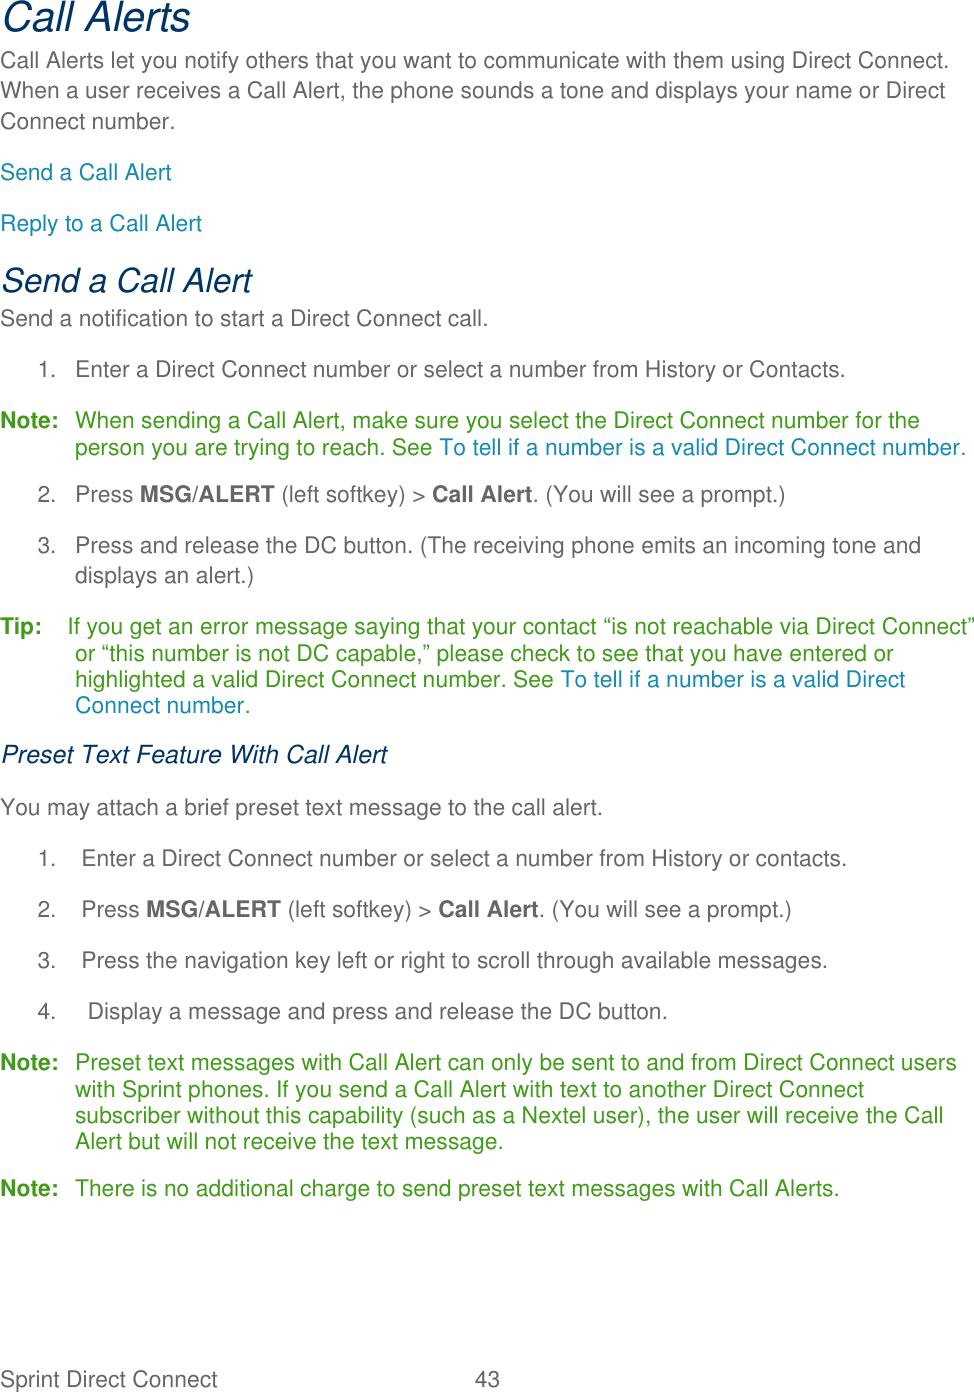  Sprint Direct Connect  43   Call Alerts Call Alerts let you notify others that you want to communicate with them using Direct Connect. When a user receives a Call Alert, the phone sounds a tone and displays your name or Direct Connect number. Send a Call Alert Reply to a Call Alert Send a Call Alert Send a notification to start a Direct Connect call.  1.  Enter a Direct Connect number or select a number from History or Contacts. Note:  When sending a Call Alert, make sure you select the Direct Connect number for the person you are trying to reach. See To tell if a number is a valid Direct Connect number. 2.  Press MSG/ALERT (left softkey) &gt; Call Alert. (You will see a prompt.) 3.  Press and release the DC button. (The receiving phone emits an incoming tone and displays an alert.) Tip:   If you get an error message saying that your contact ―is not reachable via Direct Connect‖ or ―this number is not DC capable,‖ please check to see that you have entered or highlighted a valid Direct Connect number. See To tell if a number is a valid Direct Connect number. Preset Text Feature With Call Alert You may attach a brief preset text message to the call alert. 1.  Enter a Direct Connect number or select a number from History or contacts. 2.  Press MSG/ALERT (left softkey) &gt; Call Alert. (You will see a prompt.) 3.  Press the navigation key left or right to scroll through available messages. 4.   Display a message and press and release the DC button. Note:  Preset text messages with Call Alert can only be sent to and from Direct Connect users with Sprint phones. If you send a Call Alert with text to another Direct Connect subscriber without this capability (such as a Nextel user), the user will receive the Call Alert but will not receive the text message. Note:  There is no additional charge to send preset text messages with Call Alerts. 